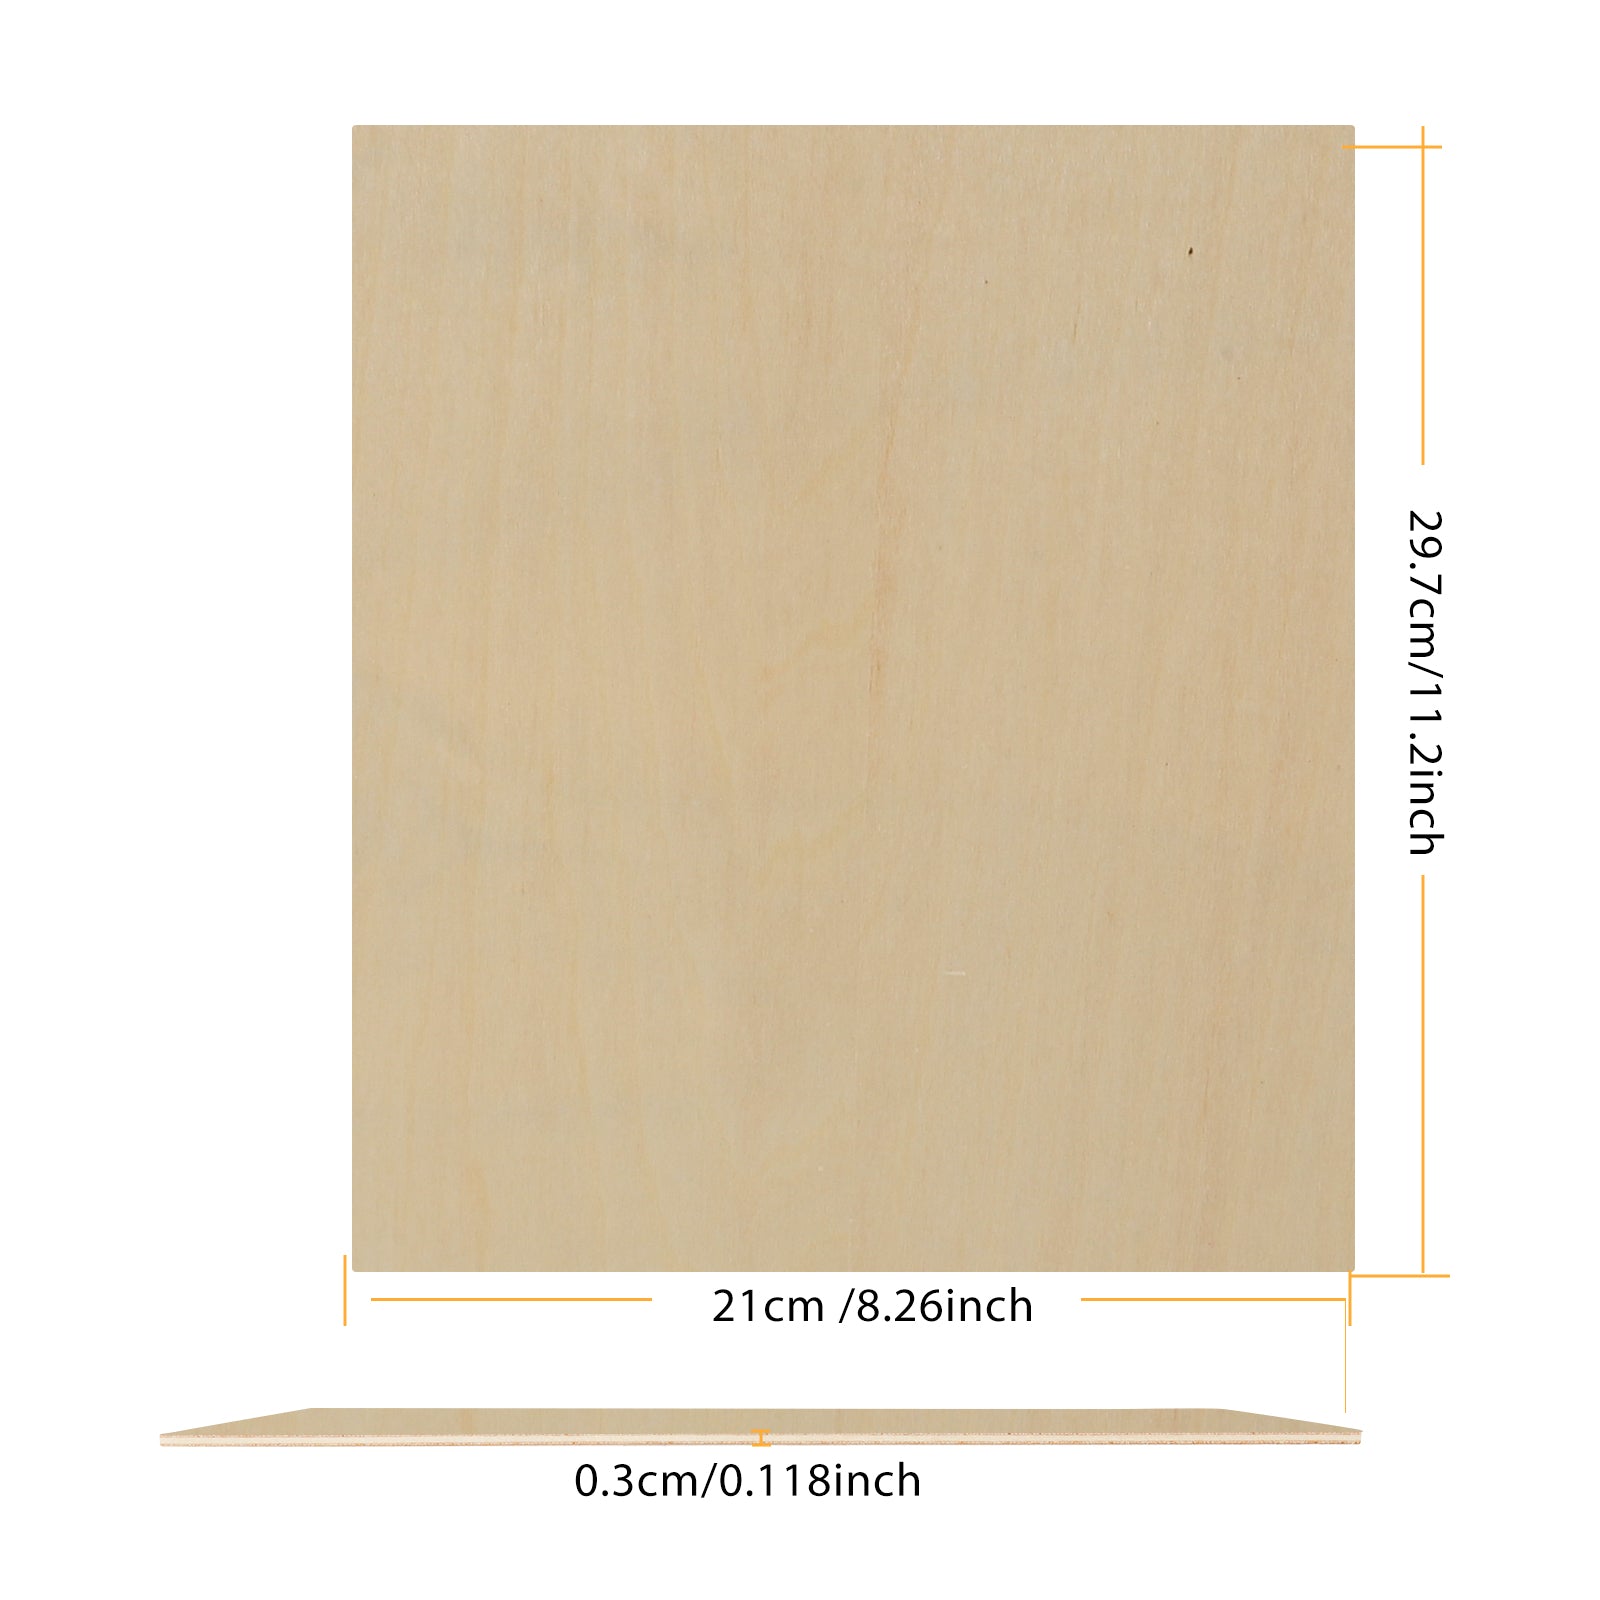 10pcs A4 Plywood Sheets 3mm Thickness (+/- 0.2mm) Basswood Plywood 21x29.7x0.3cm for Engraving - CREATORALLY